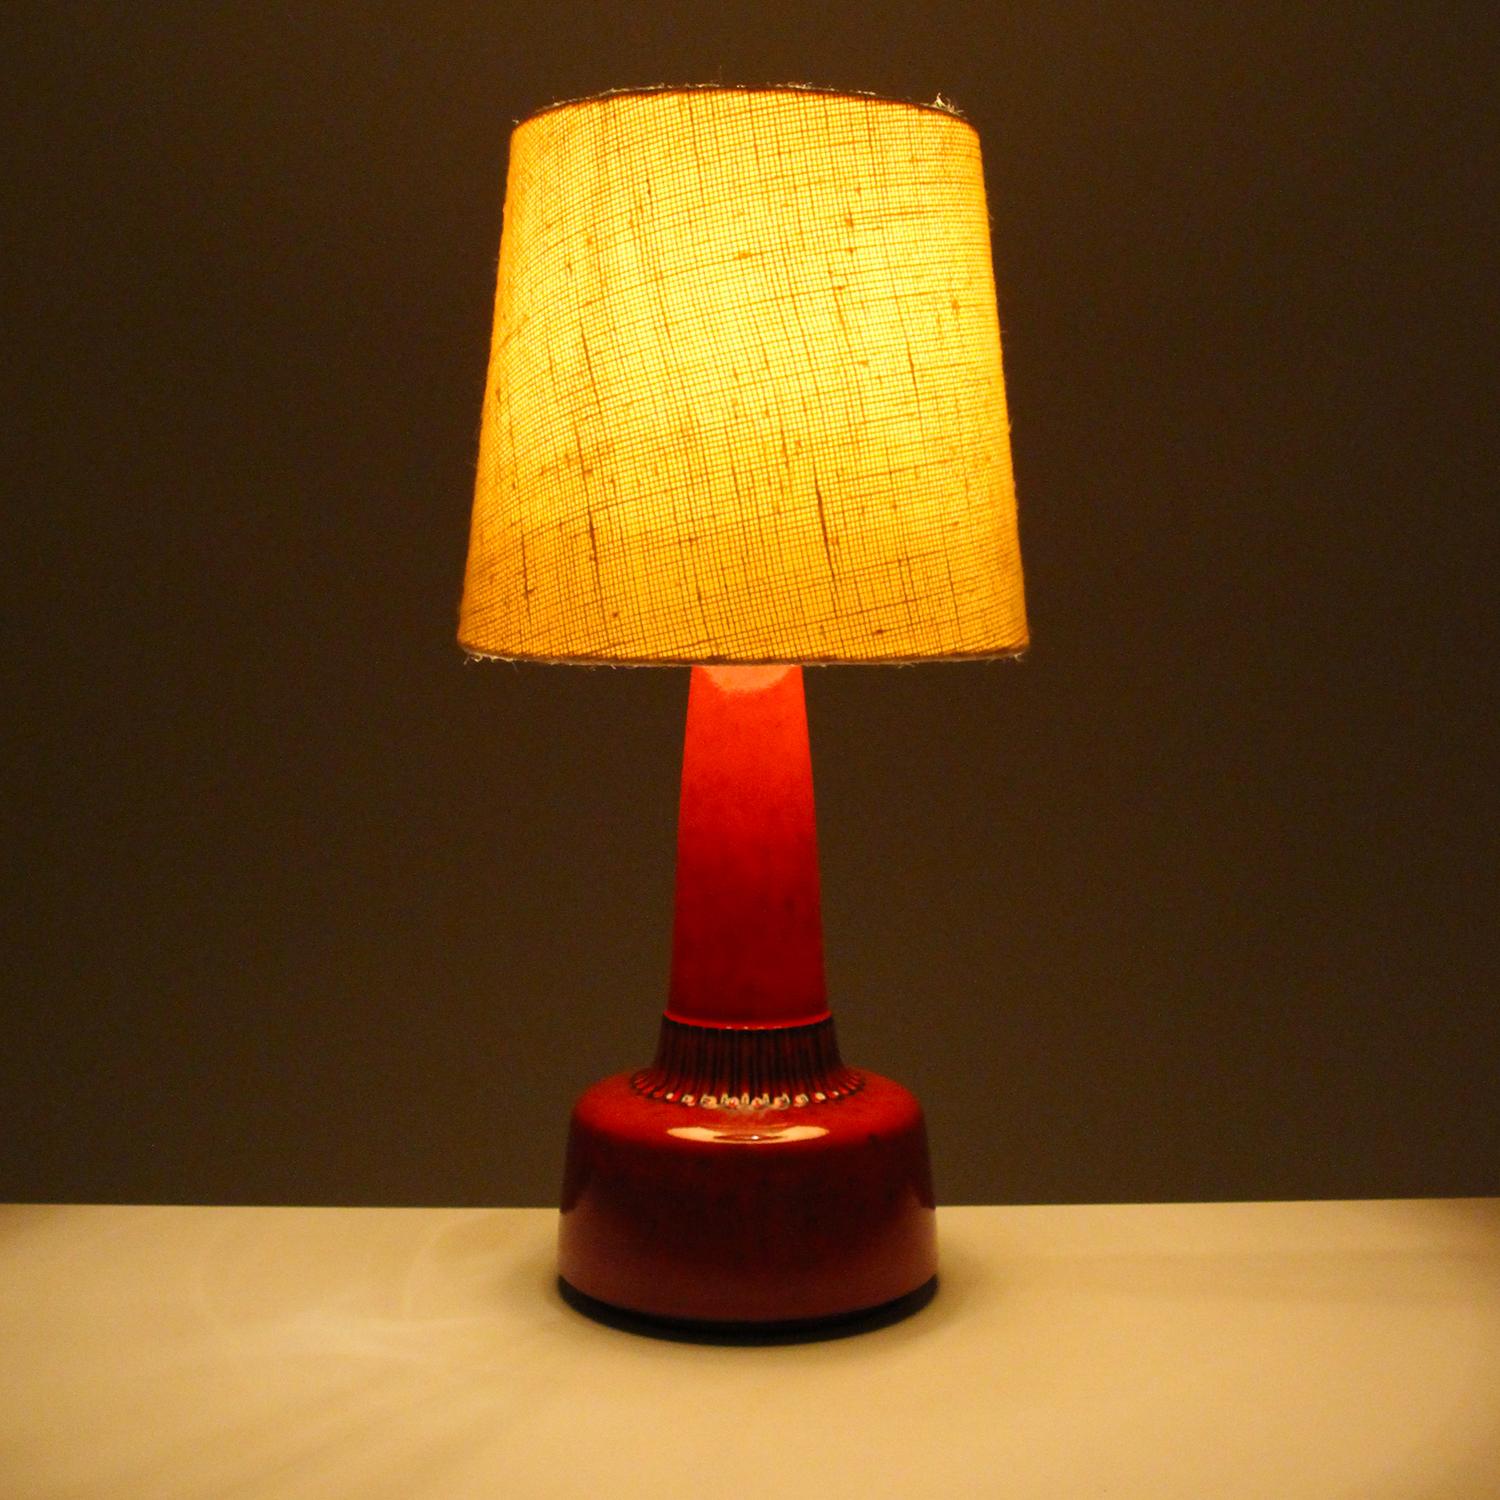 Red Table Lamp, No 1080-2 by Einar Johansen for Soholm Stentøj in the 1960s - gorgeous rich red glazed pottery lamp stand with cream white fabric shade included, all in excellent vintage condition.

This is a quite unusual Einar Johansen piece -